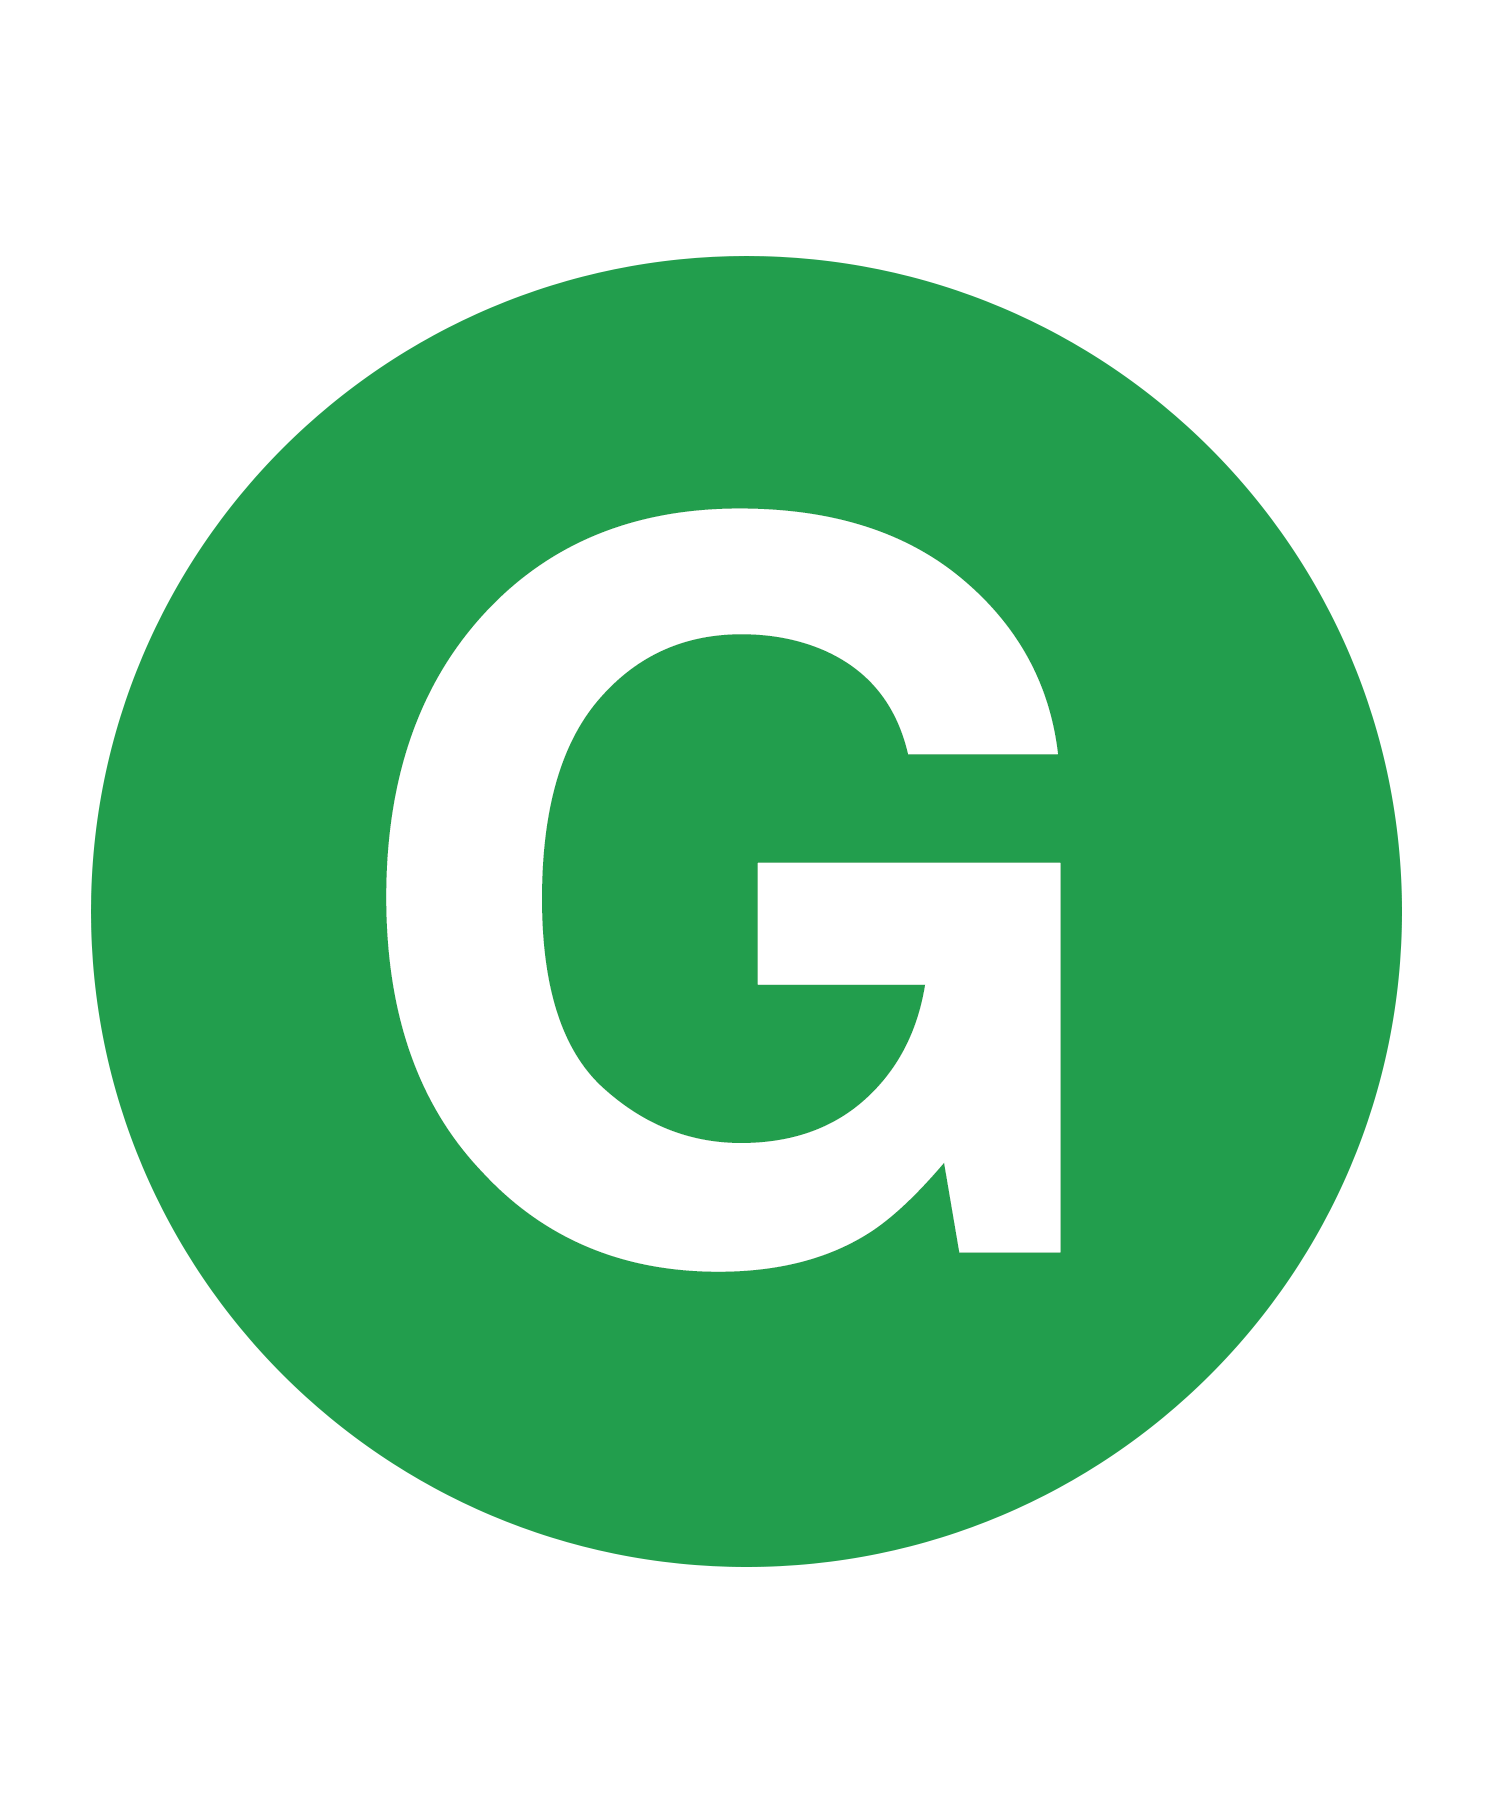 G Logo - G by Matthew Wiard on Dribbble / All of these g logo resources